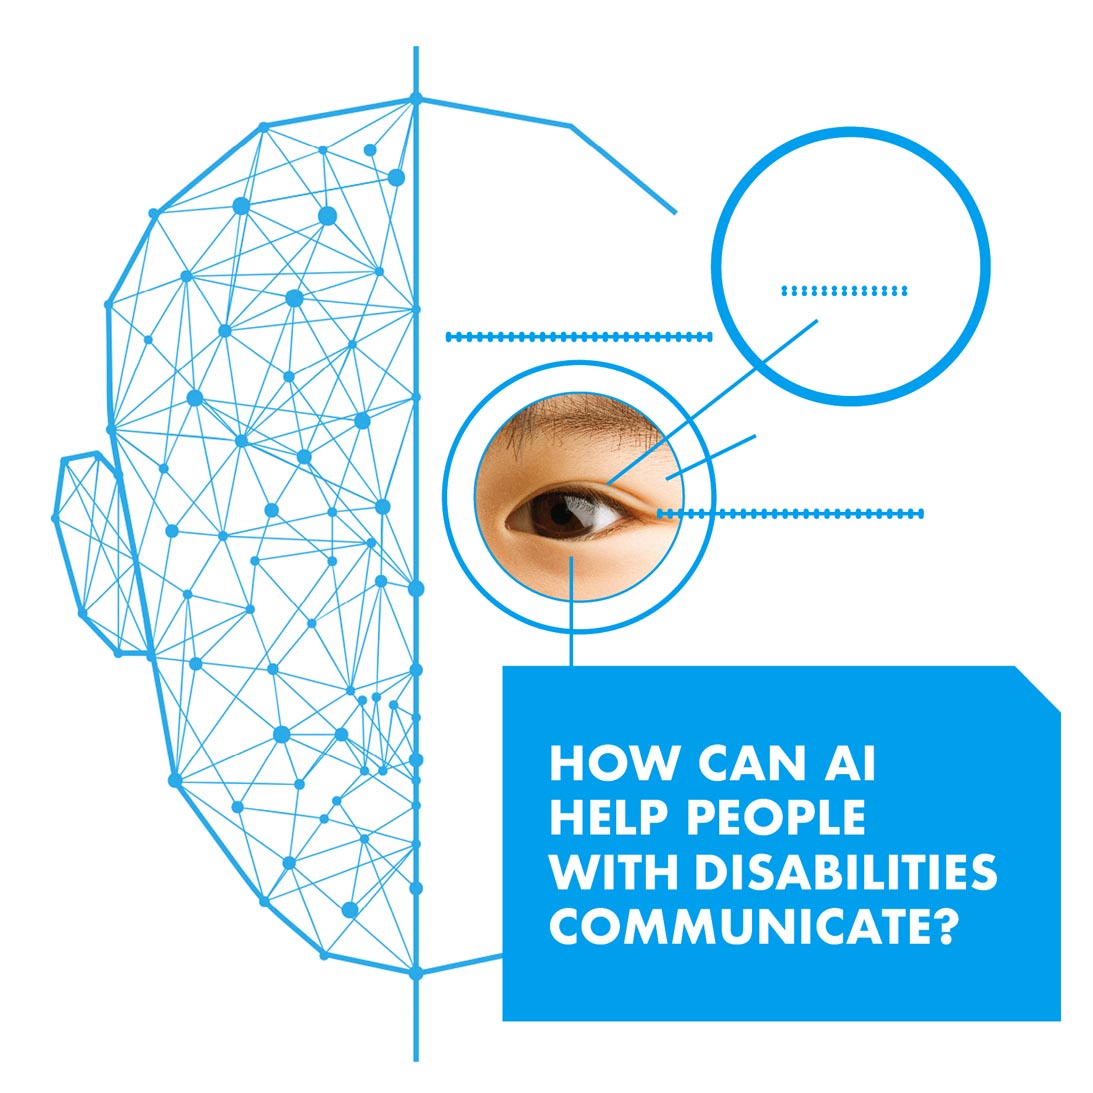 How Can AI Help People with Disabilities Communicate?